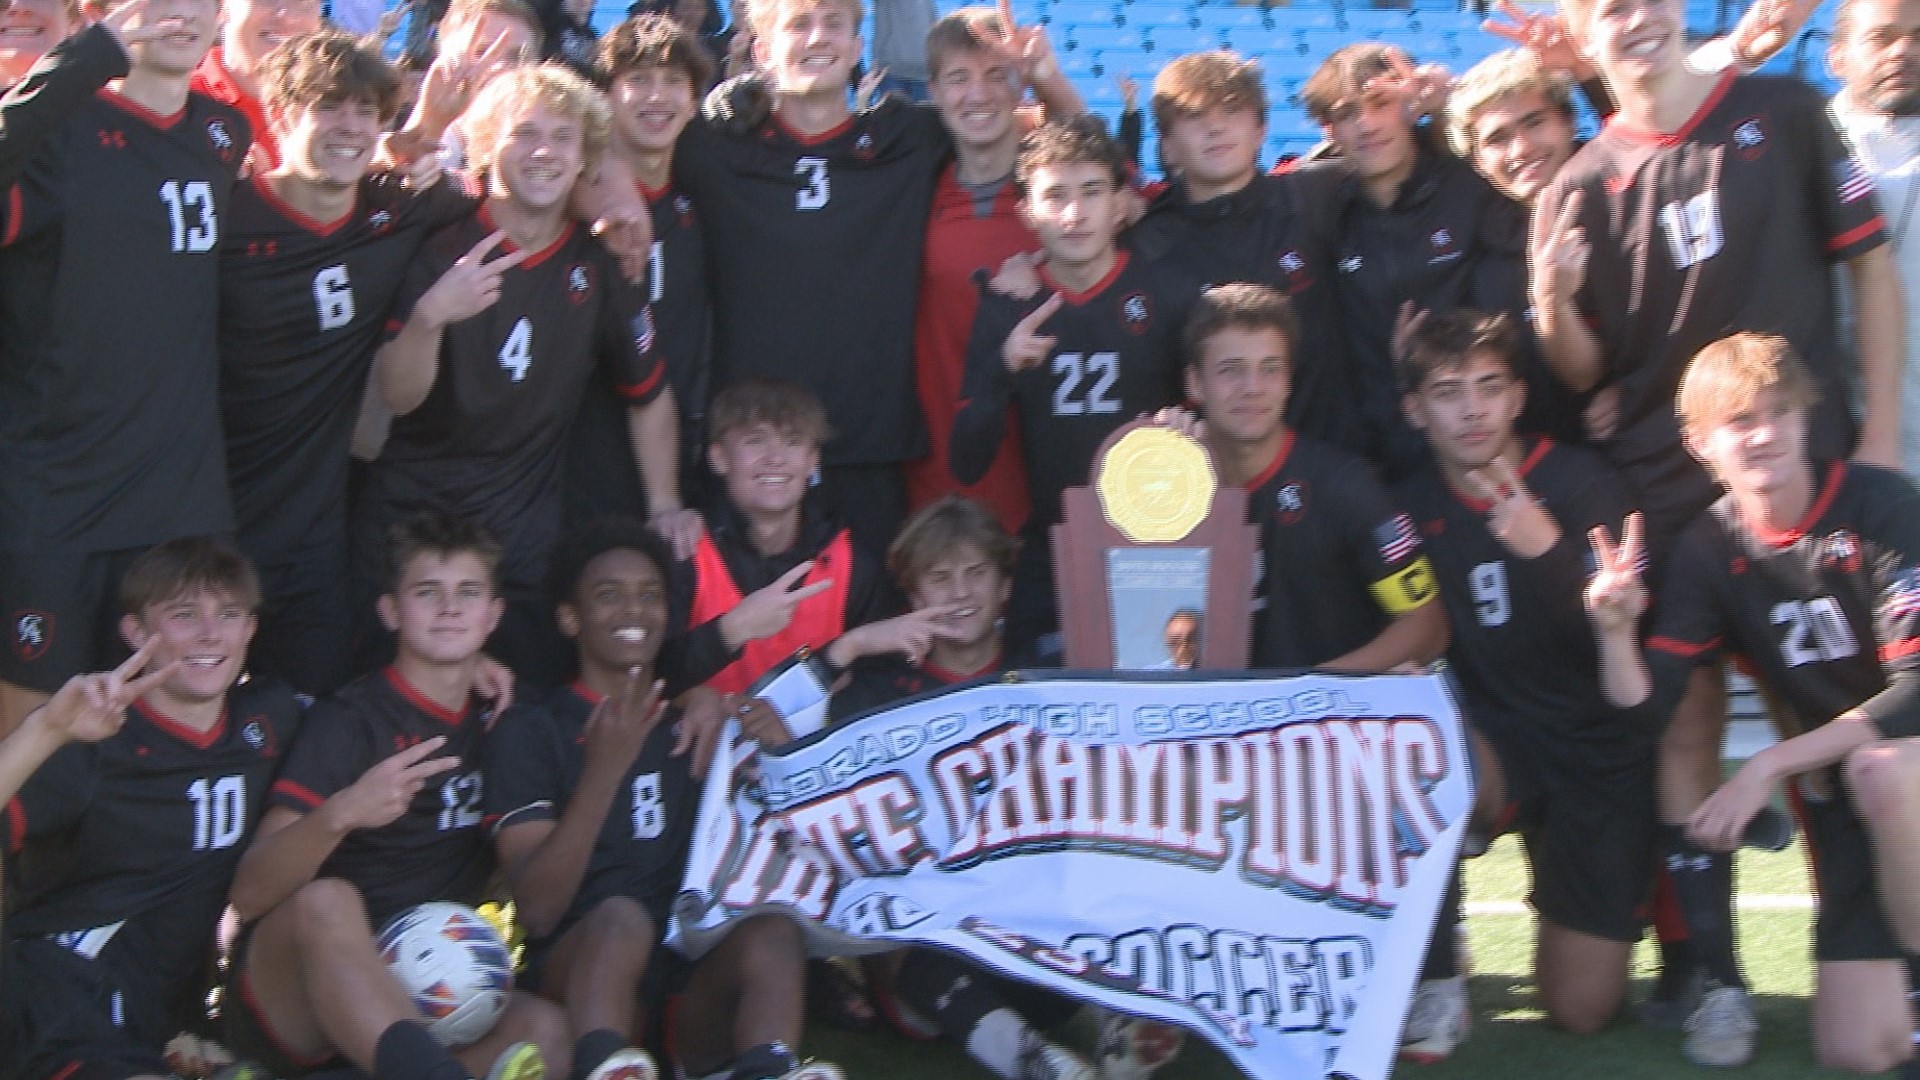 The Mustangs defeated Coal Ridge 3-1 in the Class 3A championship game on Saturday.